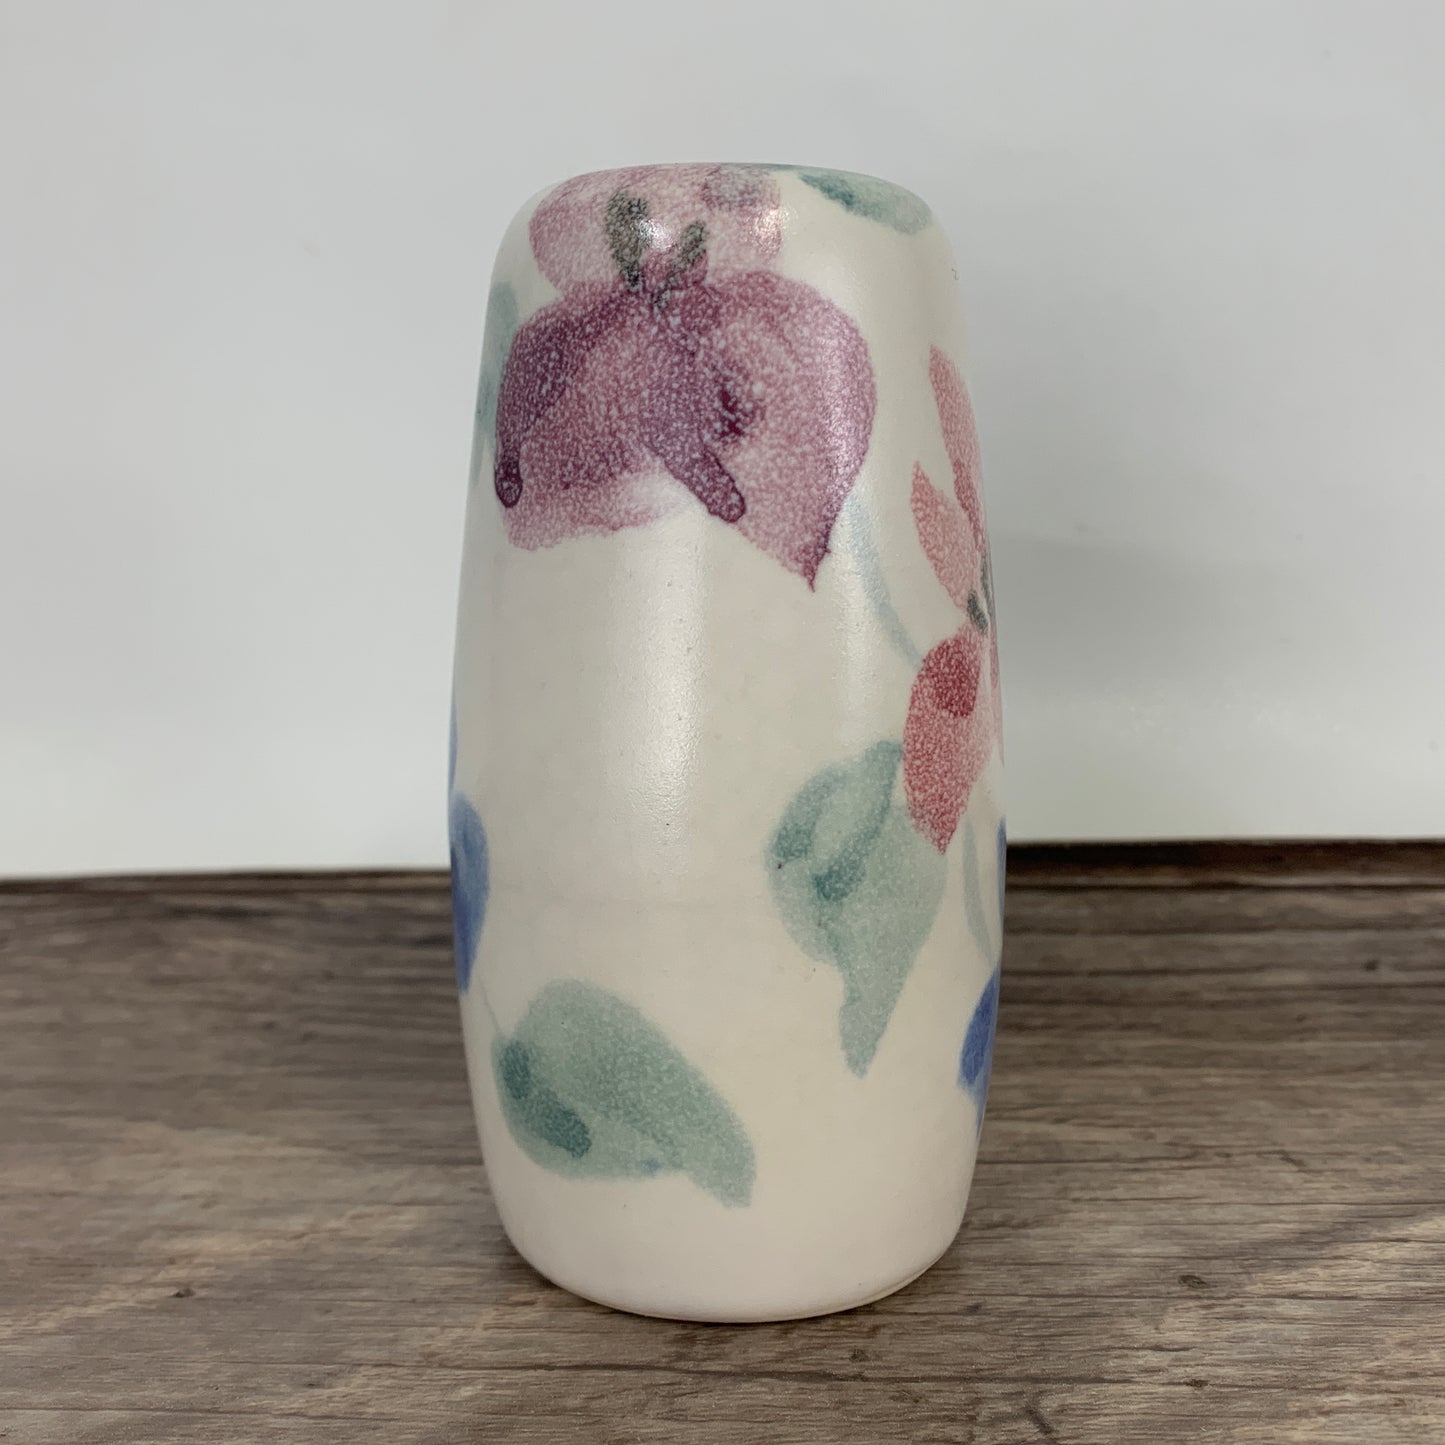 Large Ceramic Salt and Pepper with Pink and Blue Flowers, Tall Vintage Salt and Pepper Shakers